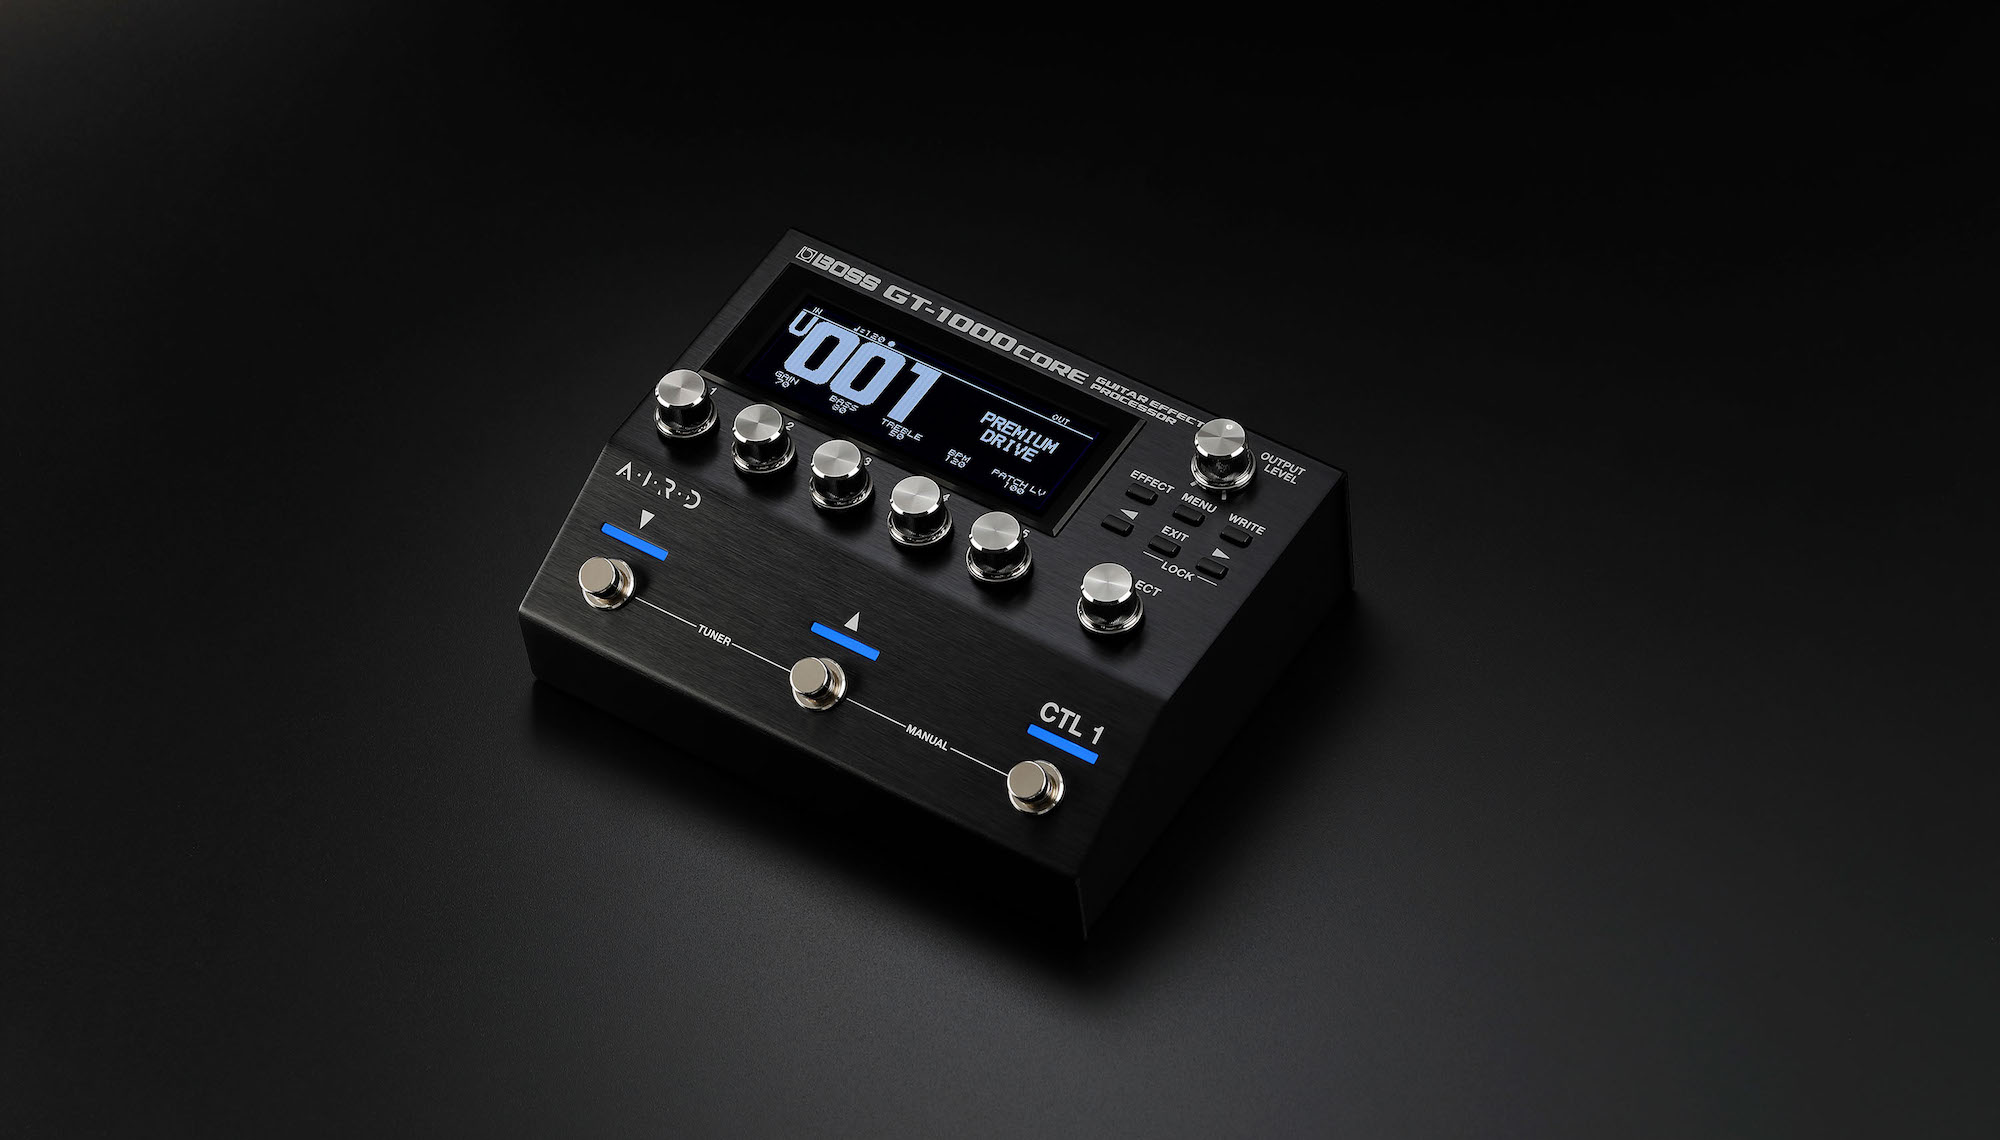 Boss Unveils New GT-1000CORE Multi-Effects Pedal | GuitarPlayer